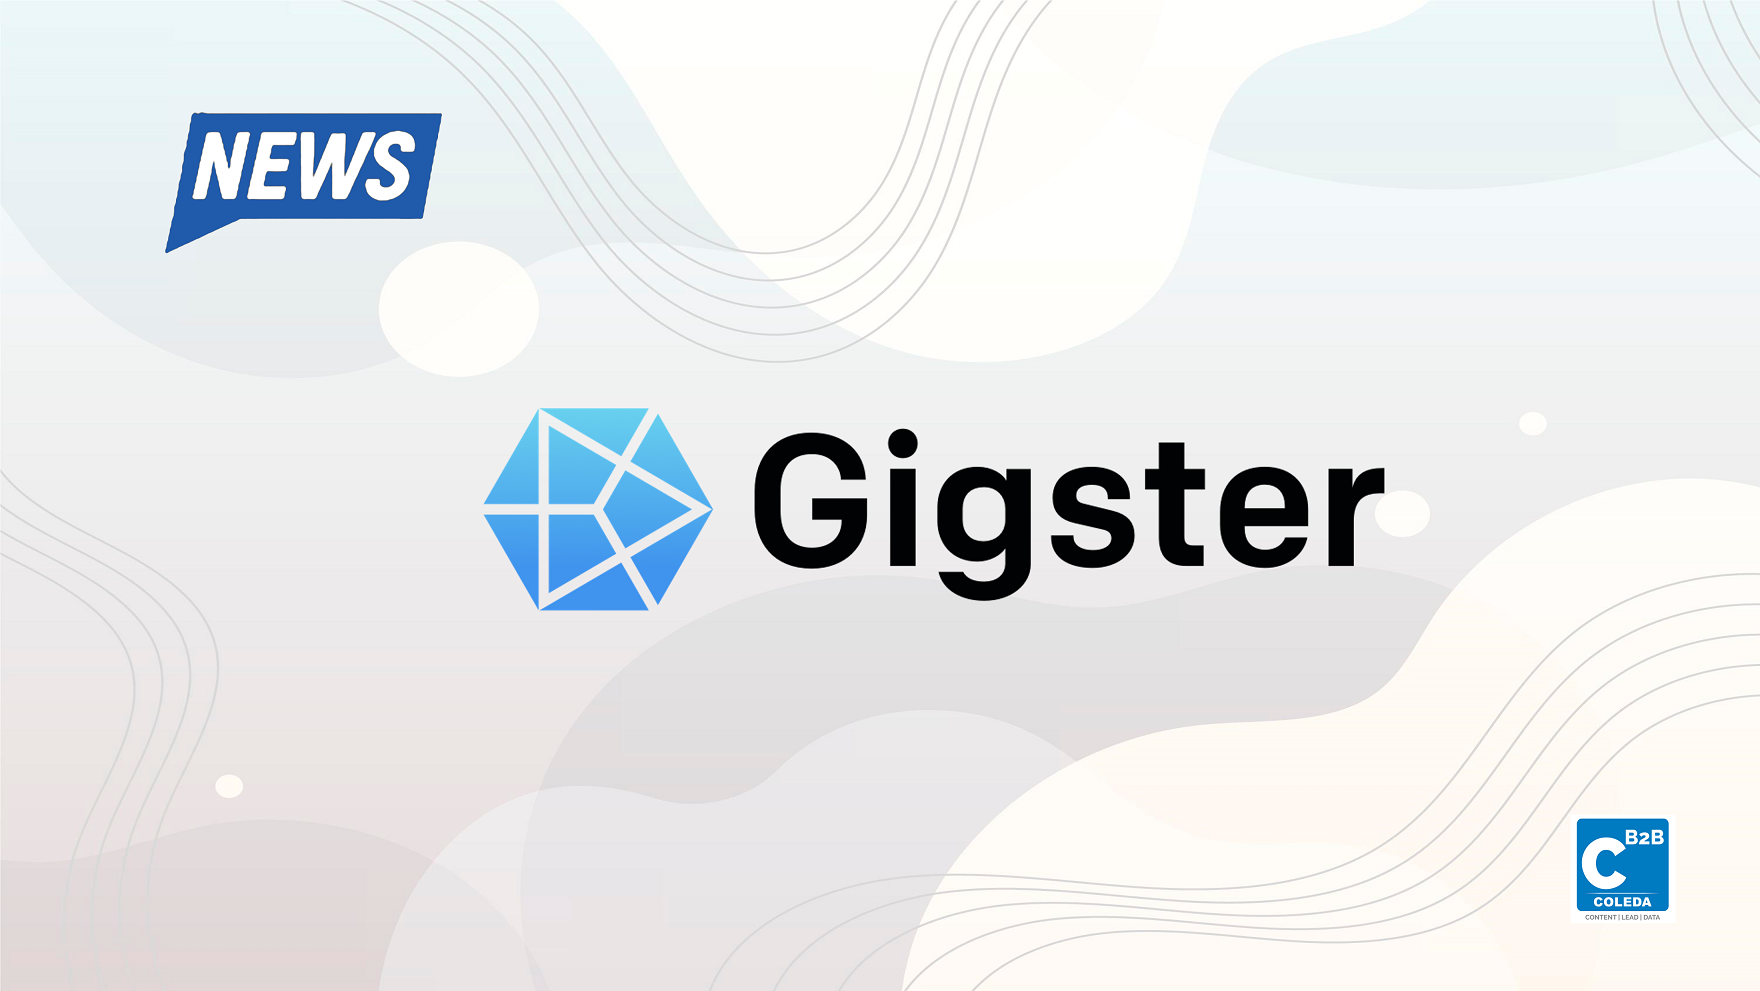 Gigster Has Launched an AI Services Package